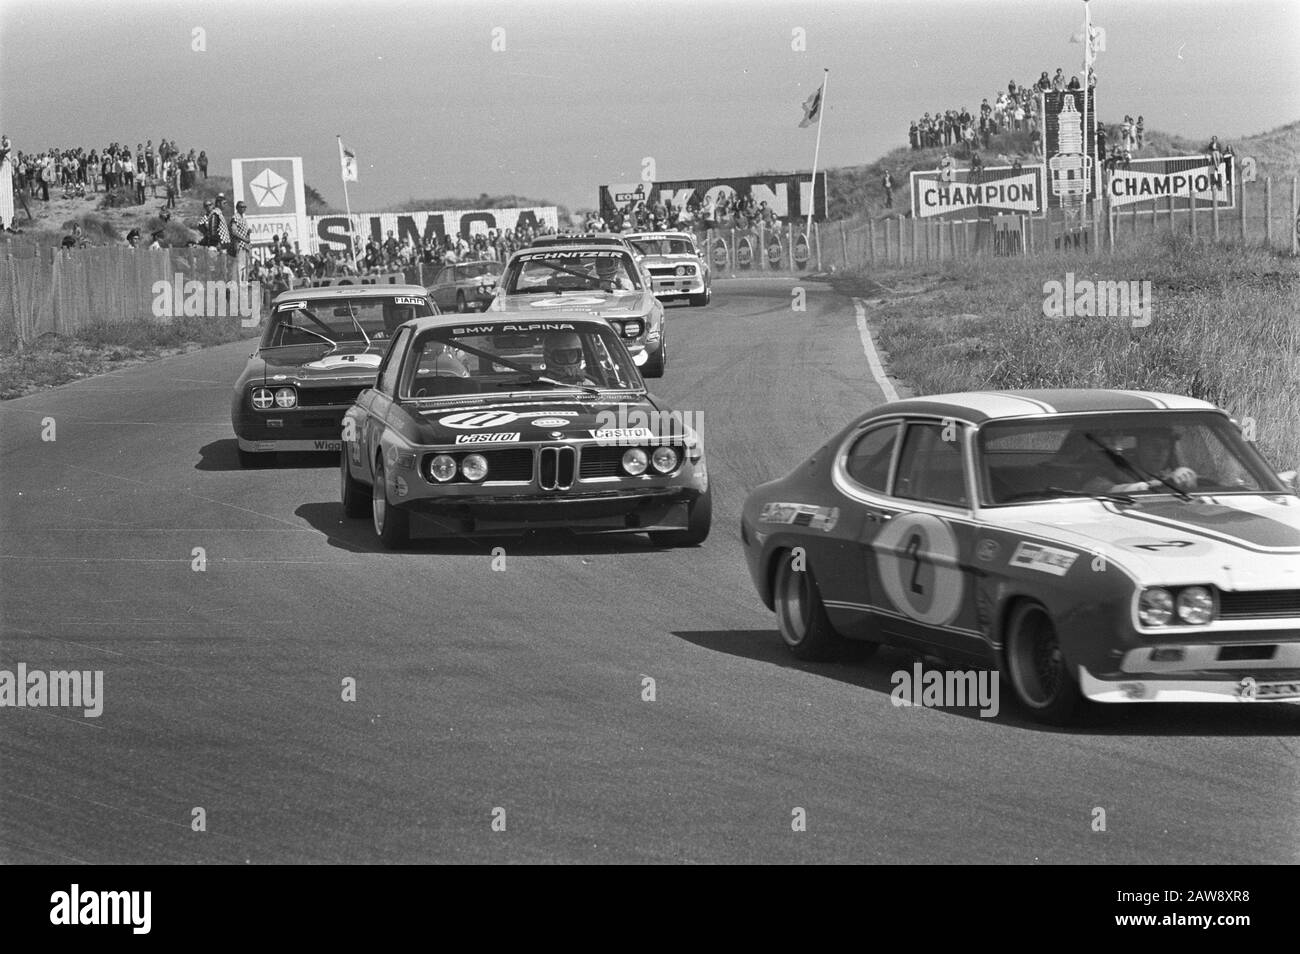 Levis Challenge Cup race at Zandvoort circuit (Europcup for touring cars),  Hezemans in action with BMW alpina (No. 11) Date: August 20, 1972 Location:  North -Holland, Zandvoort Keywords: car racing, tracks Stock Photo - Alamy